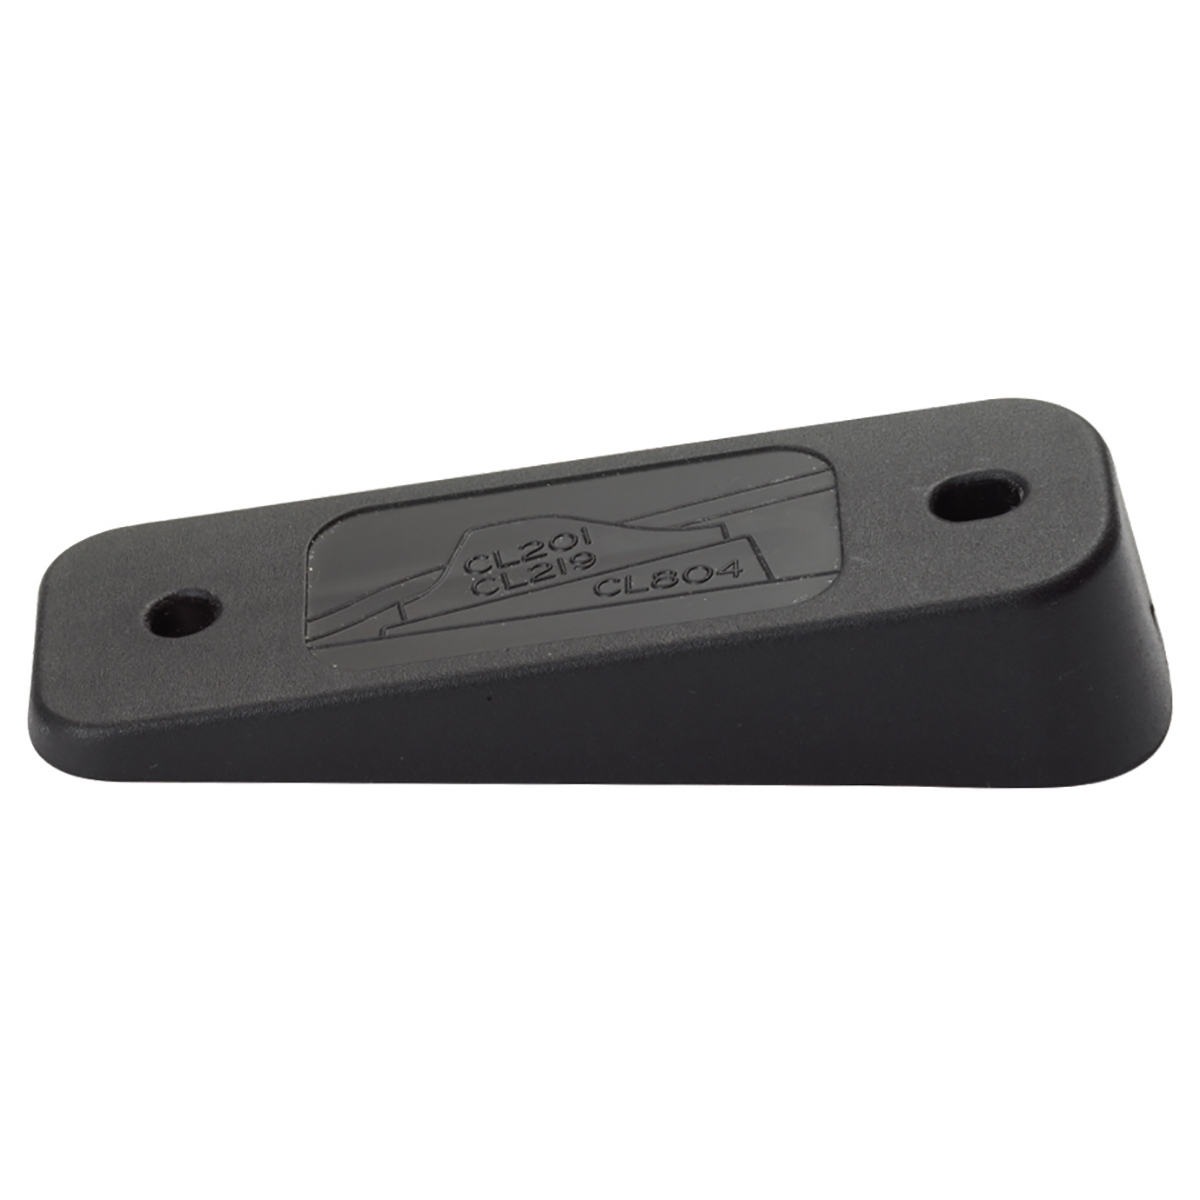 C804 - Clamcleat Wedge Vertical (Pk Size: 1)